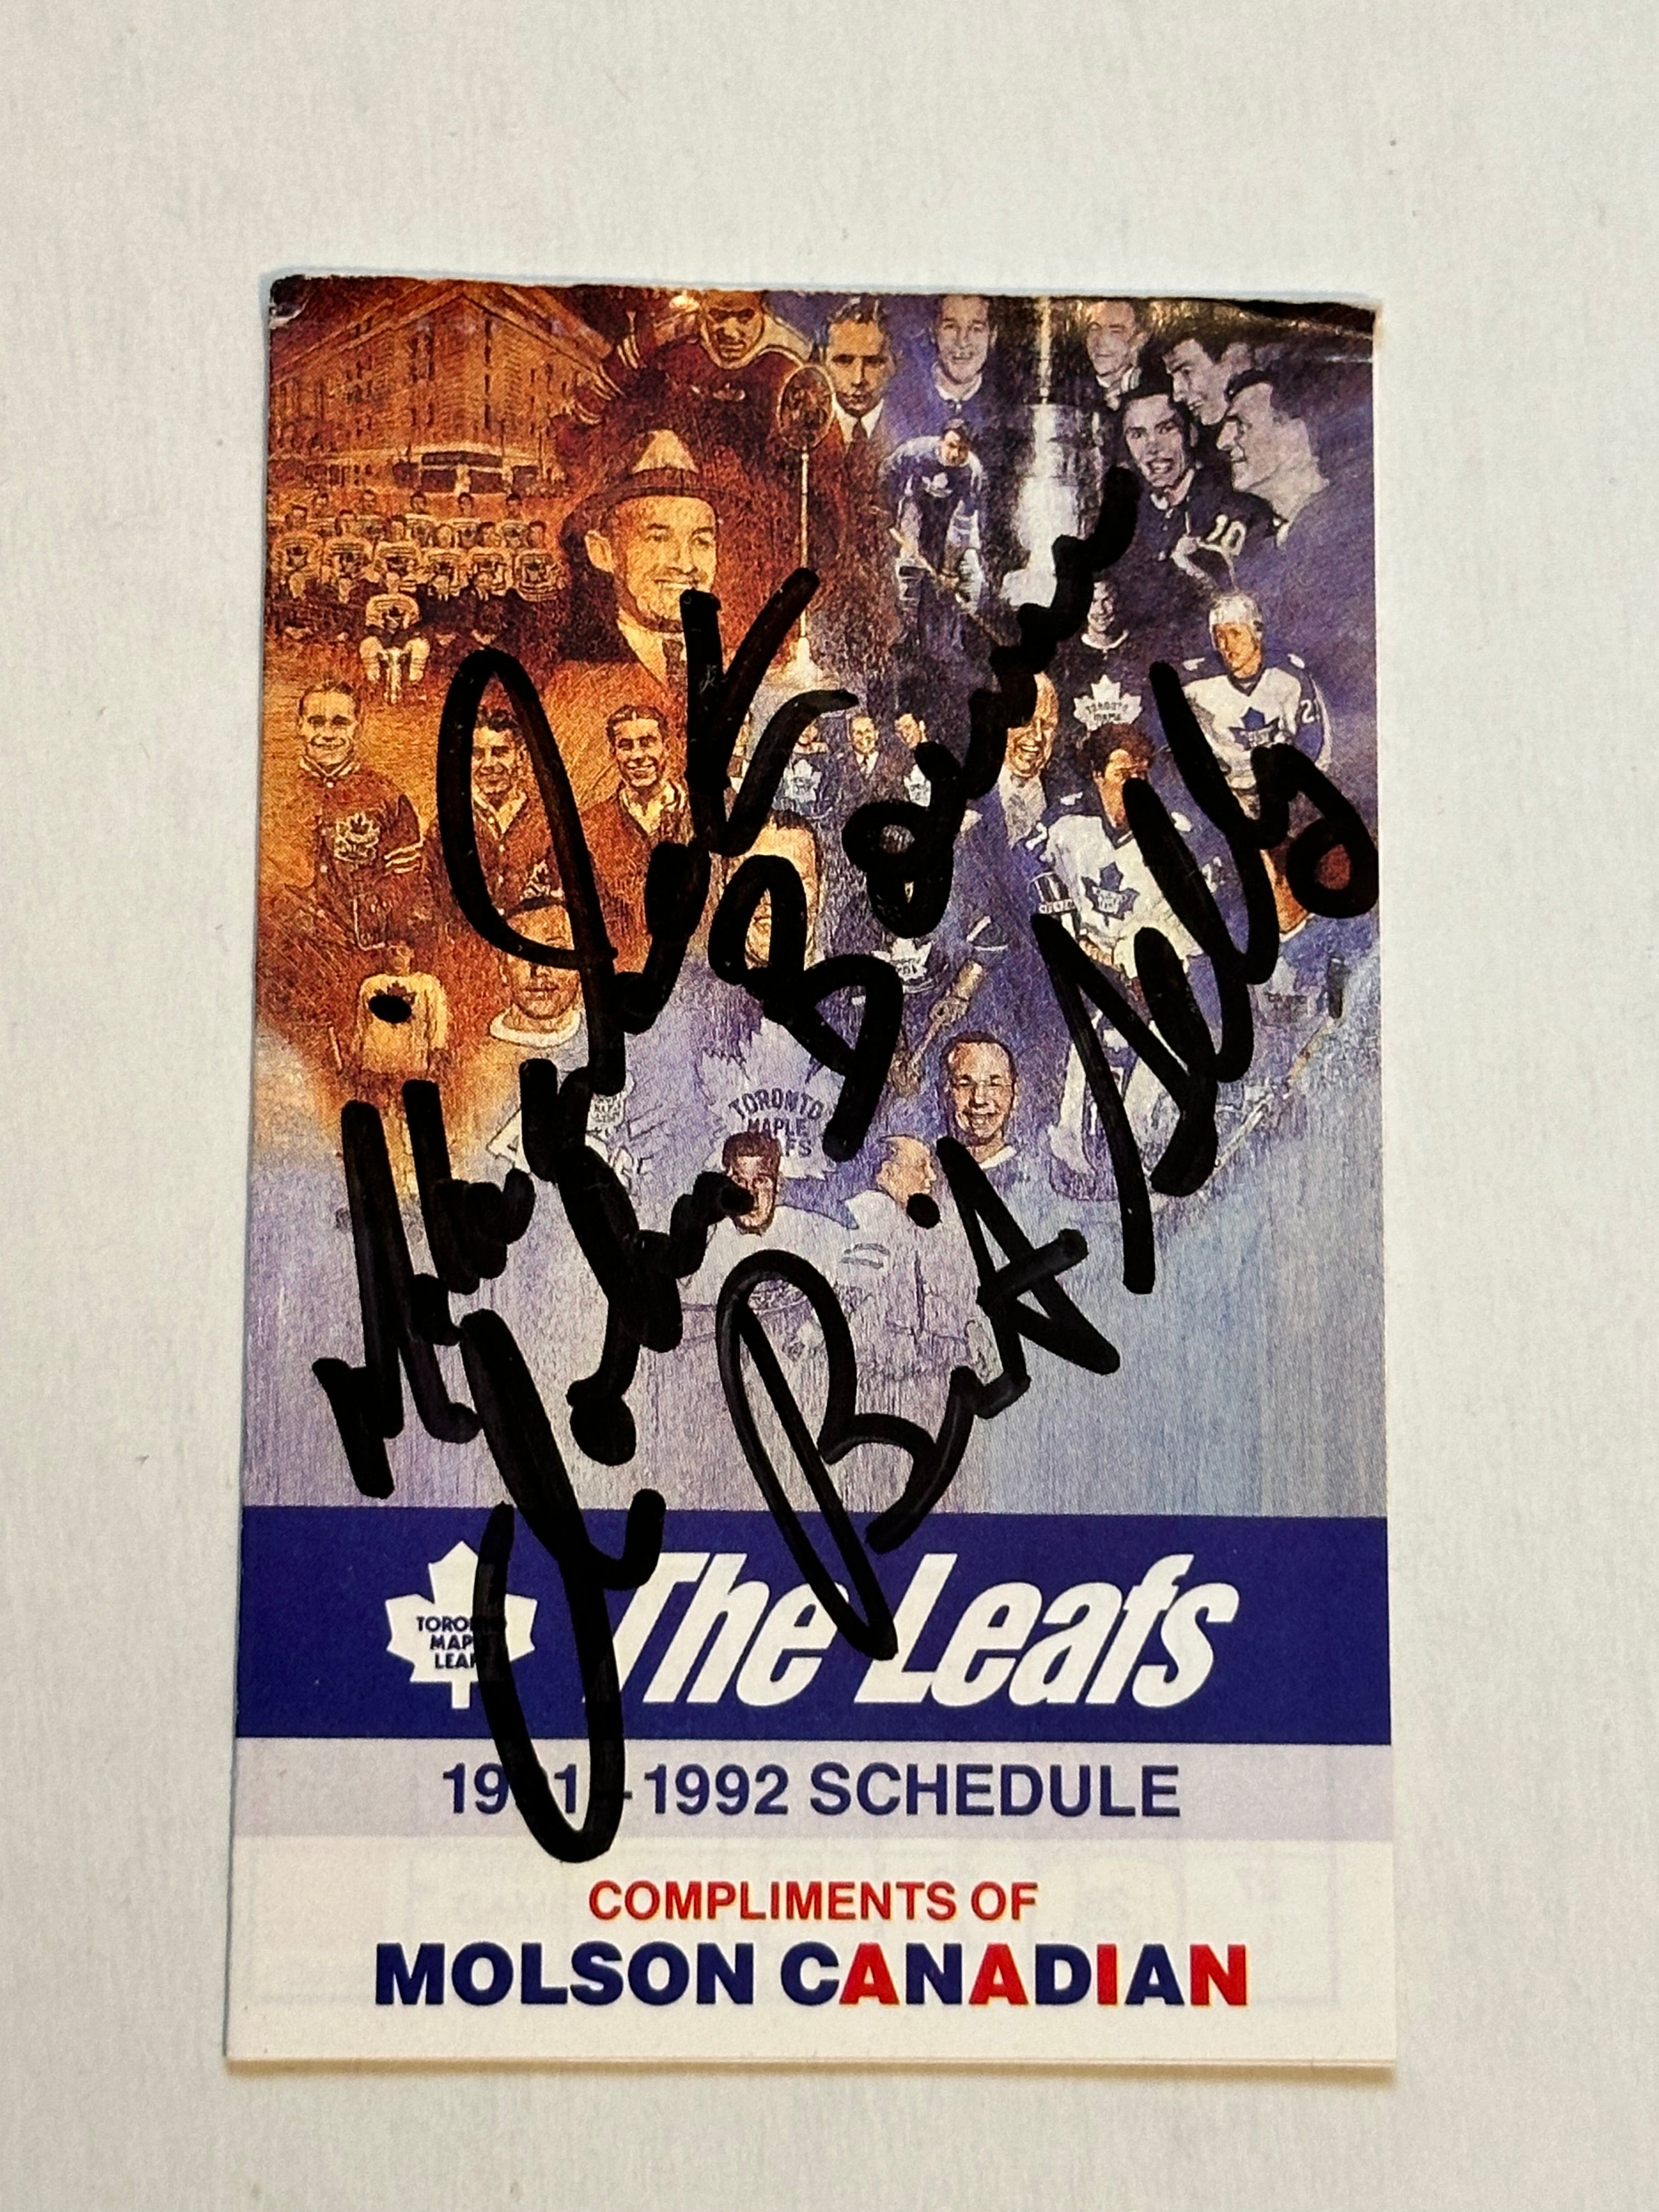 Toronto Maple Leafs vintage hockey schedule signed in person by Johnny Bower and Brit Selby. Sold with COA.